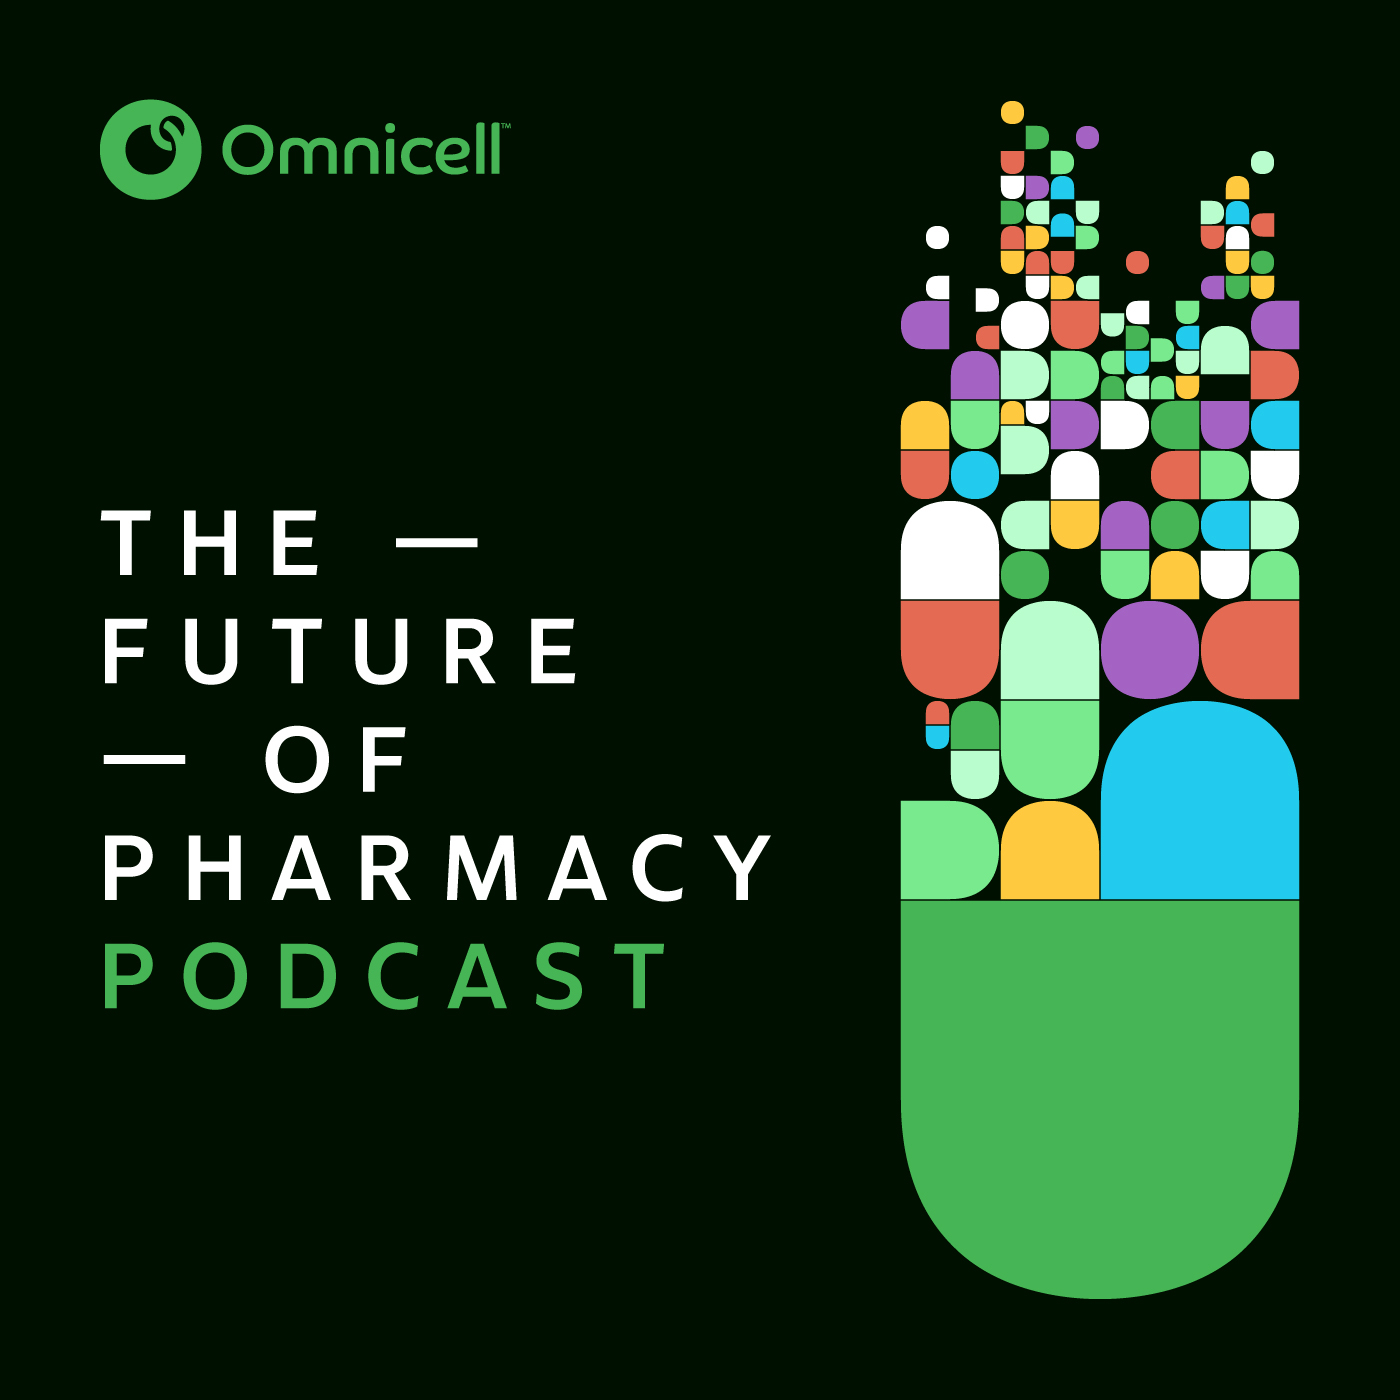 The Future of Pharmacy Podcast